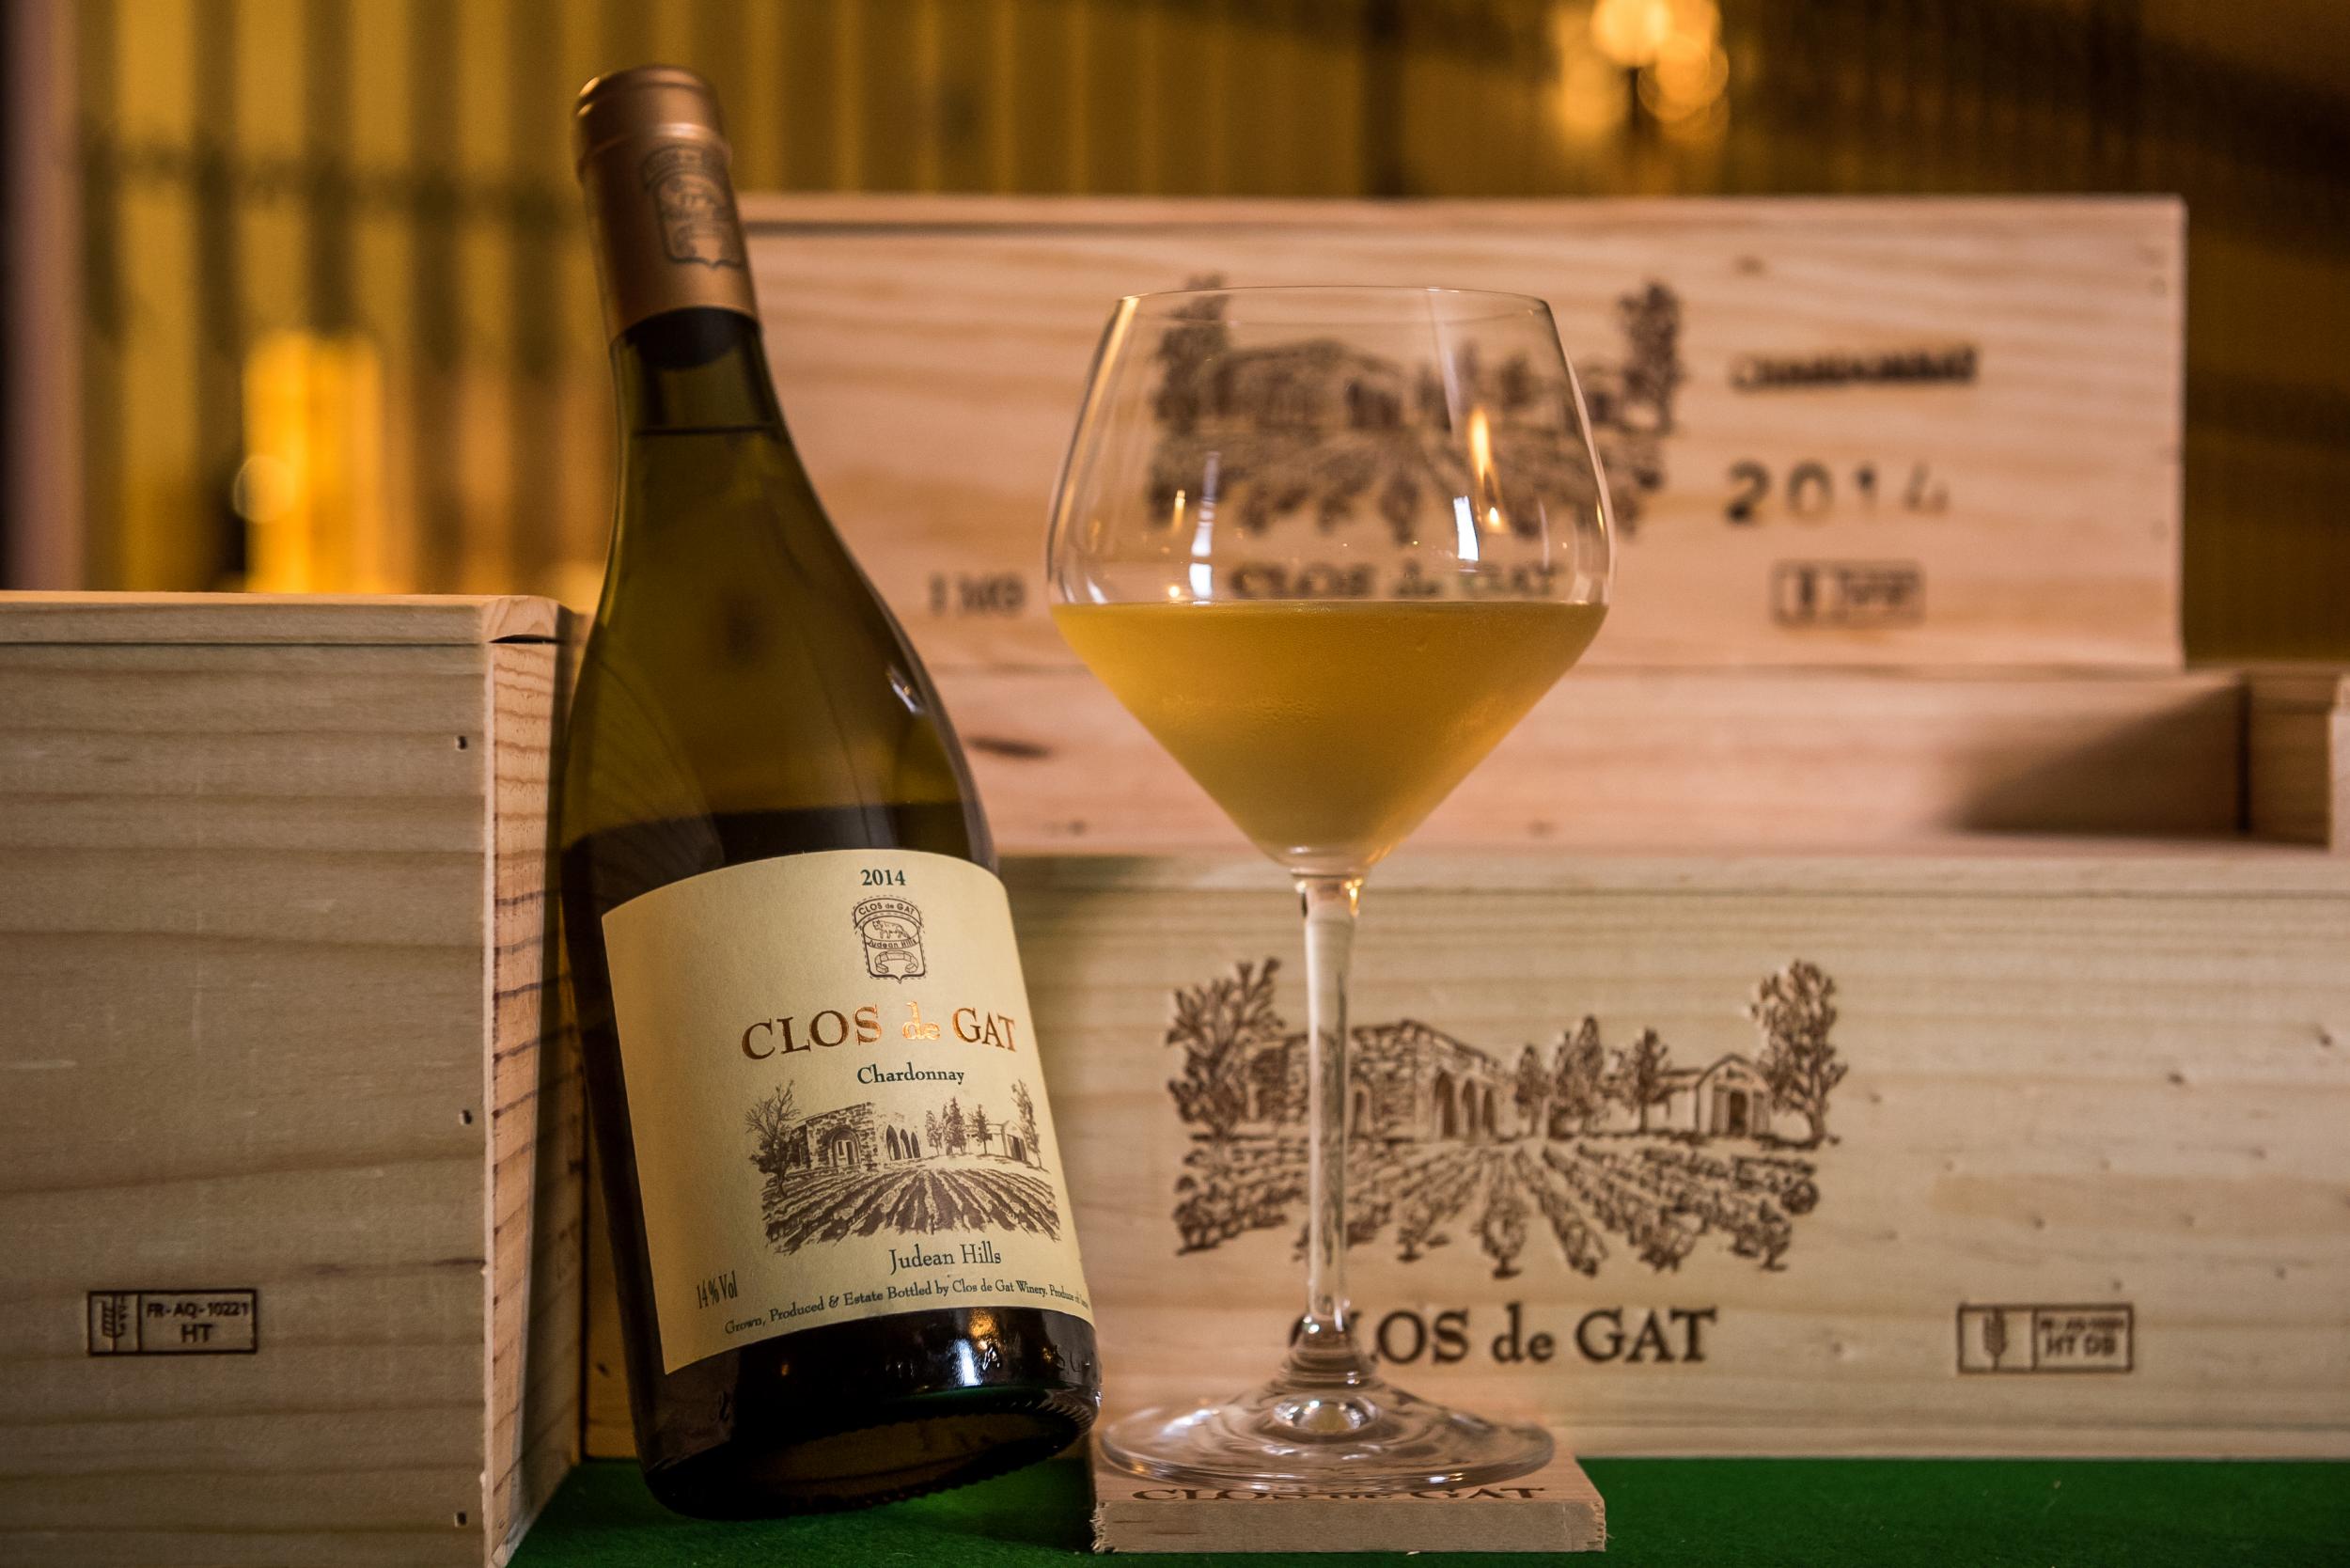 Clos de Gat wants to compete with the best wineries in the world